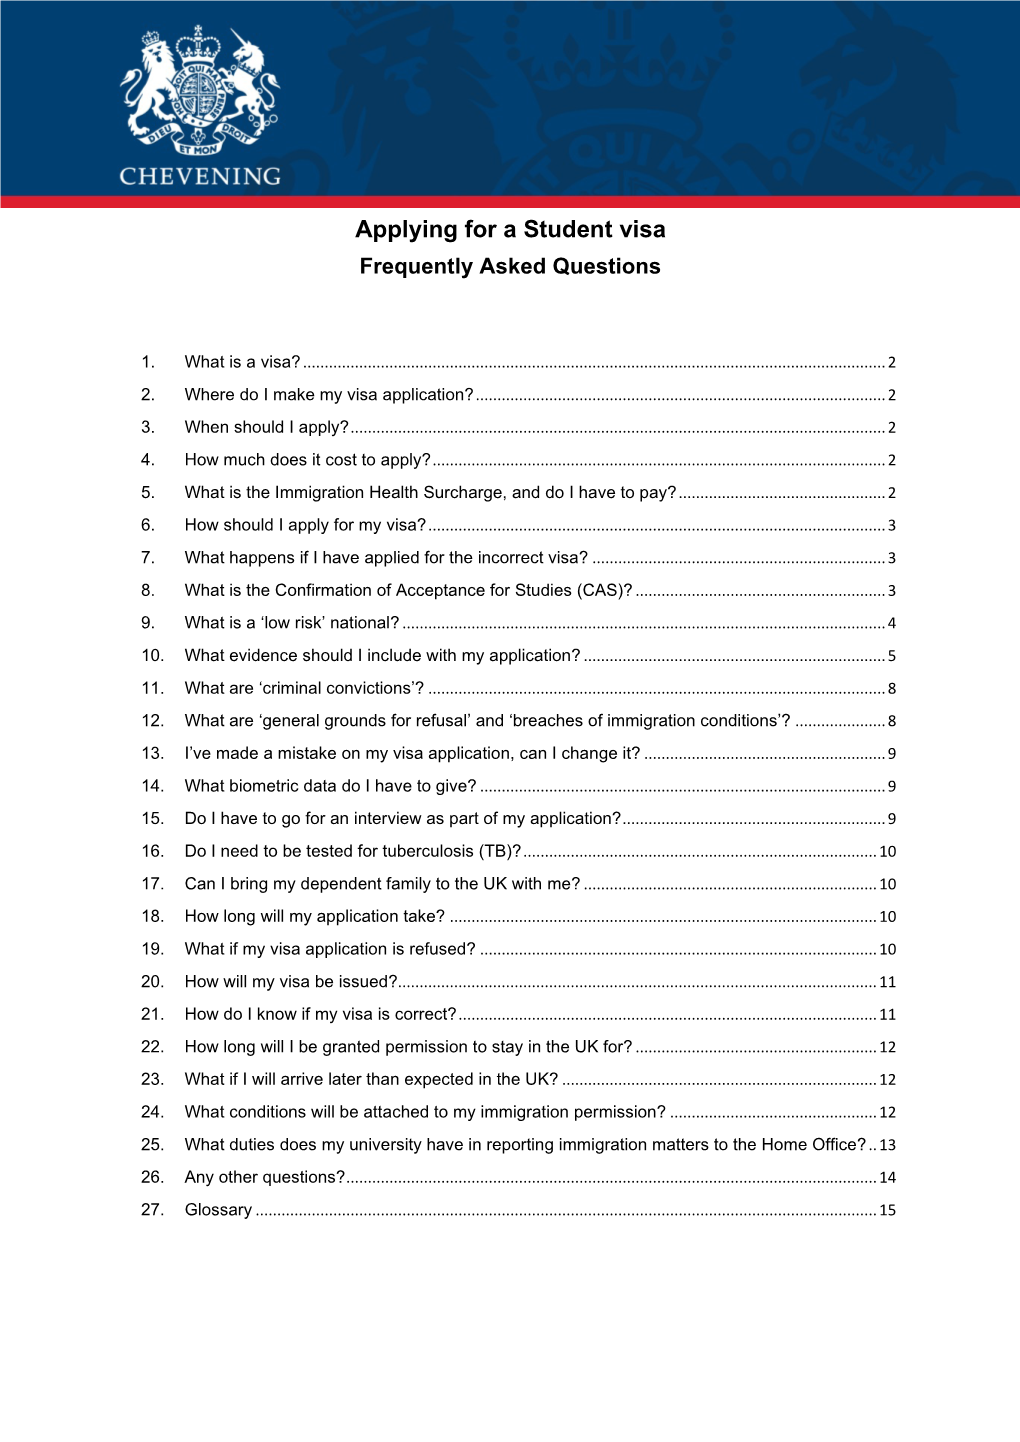 Applying for a Student Visa Frequently Asked Questions